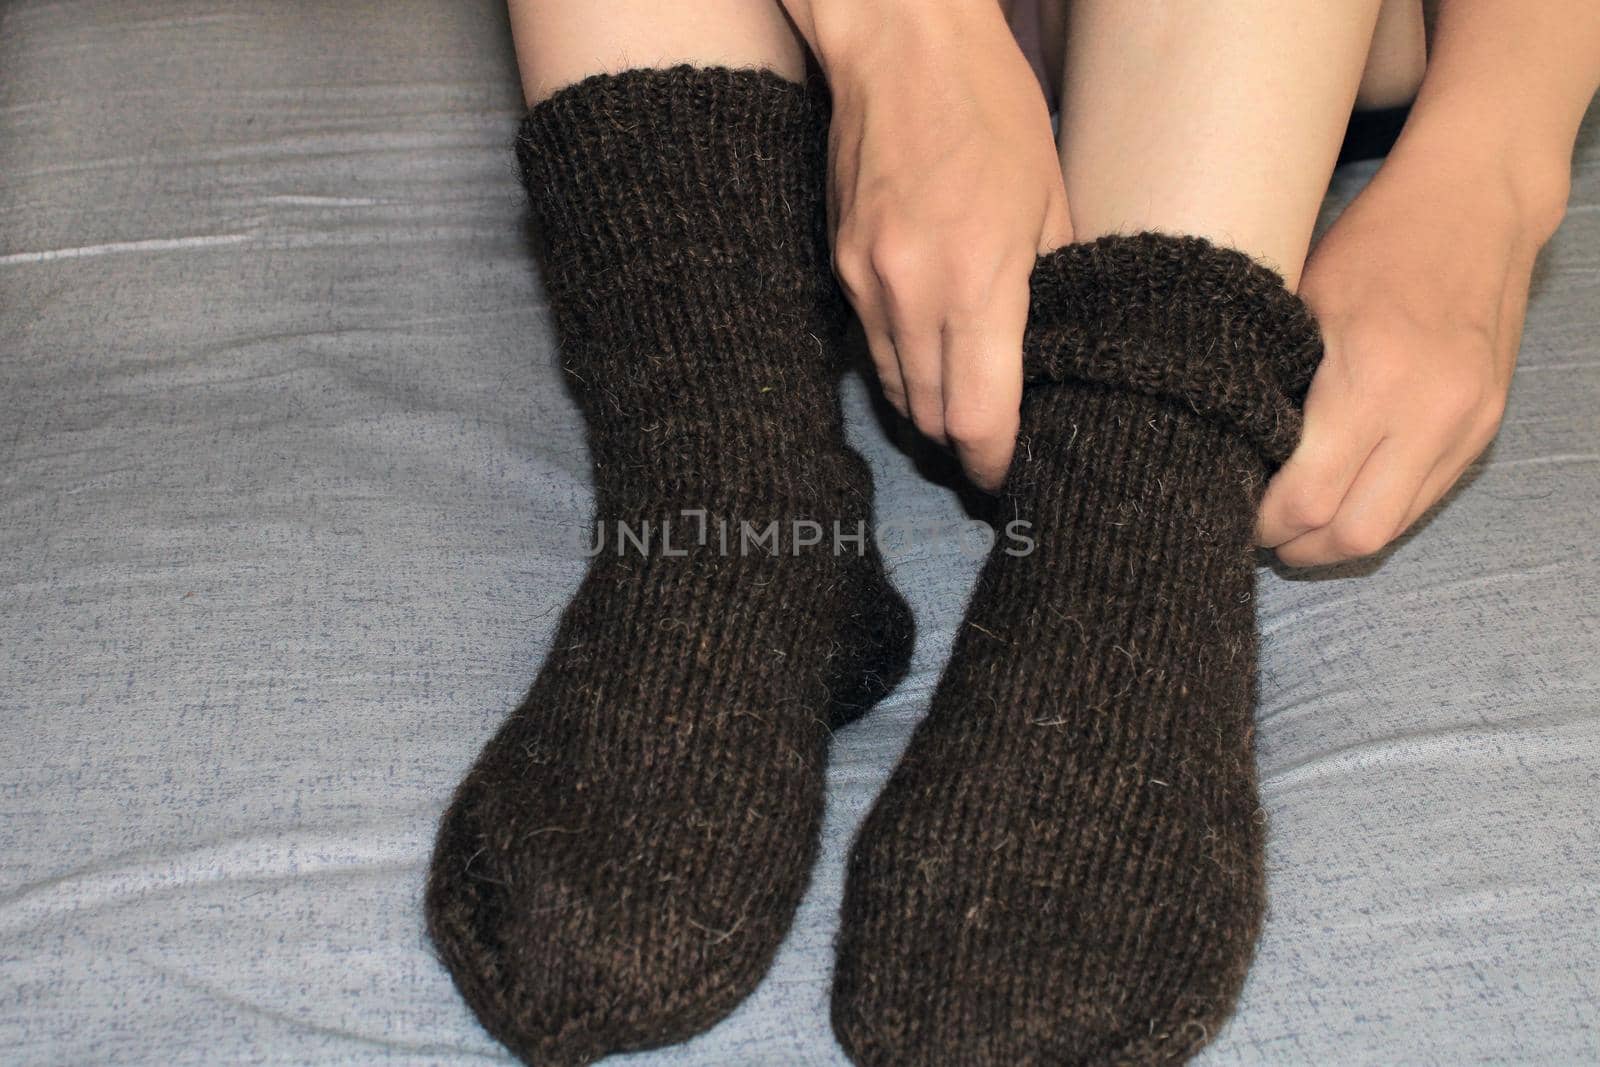 A young woman with slender legs sits on the bed at home and puts on woolen socks. The concept of the world energy crisis by IronG96